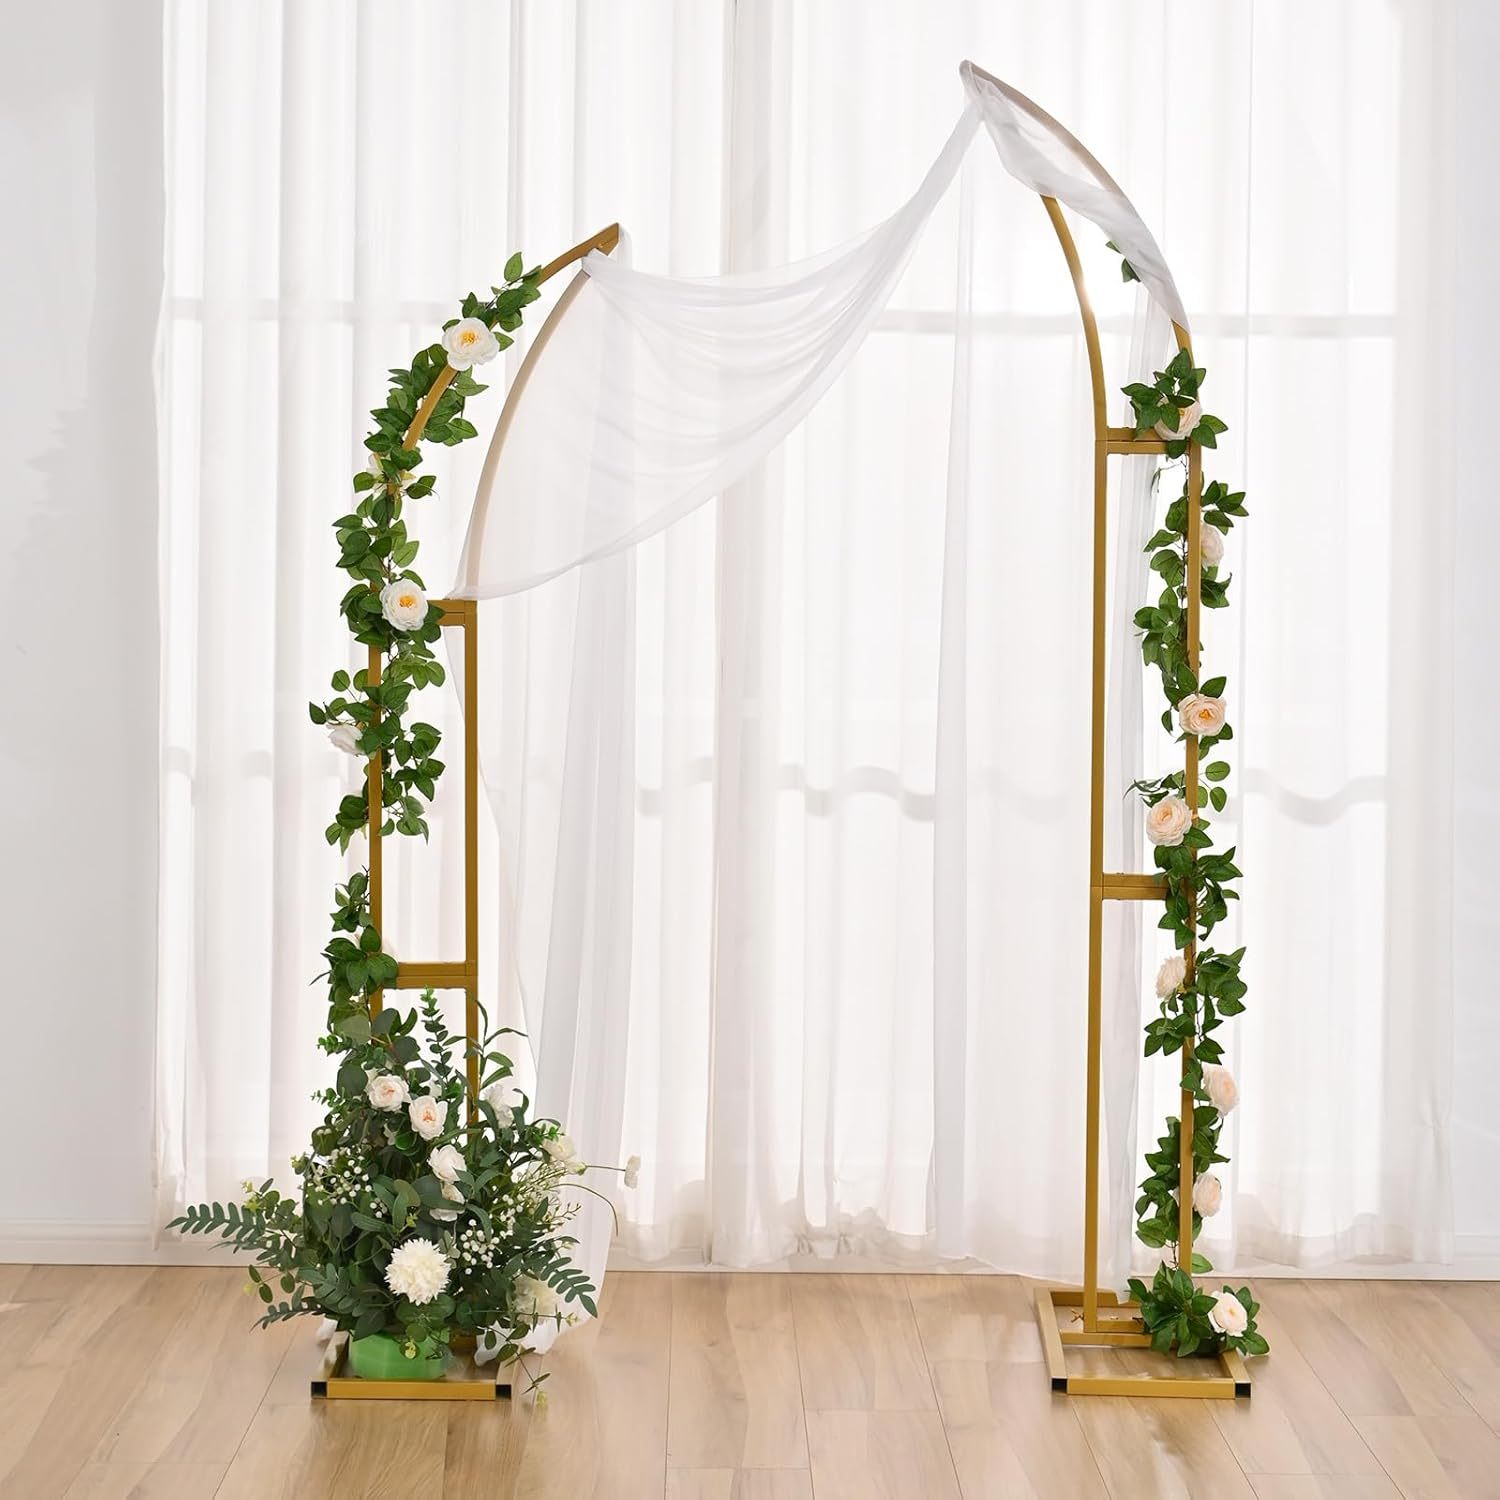 

2pcs Curved Wedding Arch Backdrop Stand, Balloon Arch For Ceremony Birthday Party Bride Baby Shower, Metal Half Moon Wedding Arch Backdrop Stand With Rectangular Base (5.9ft, 6.9ft)